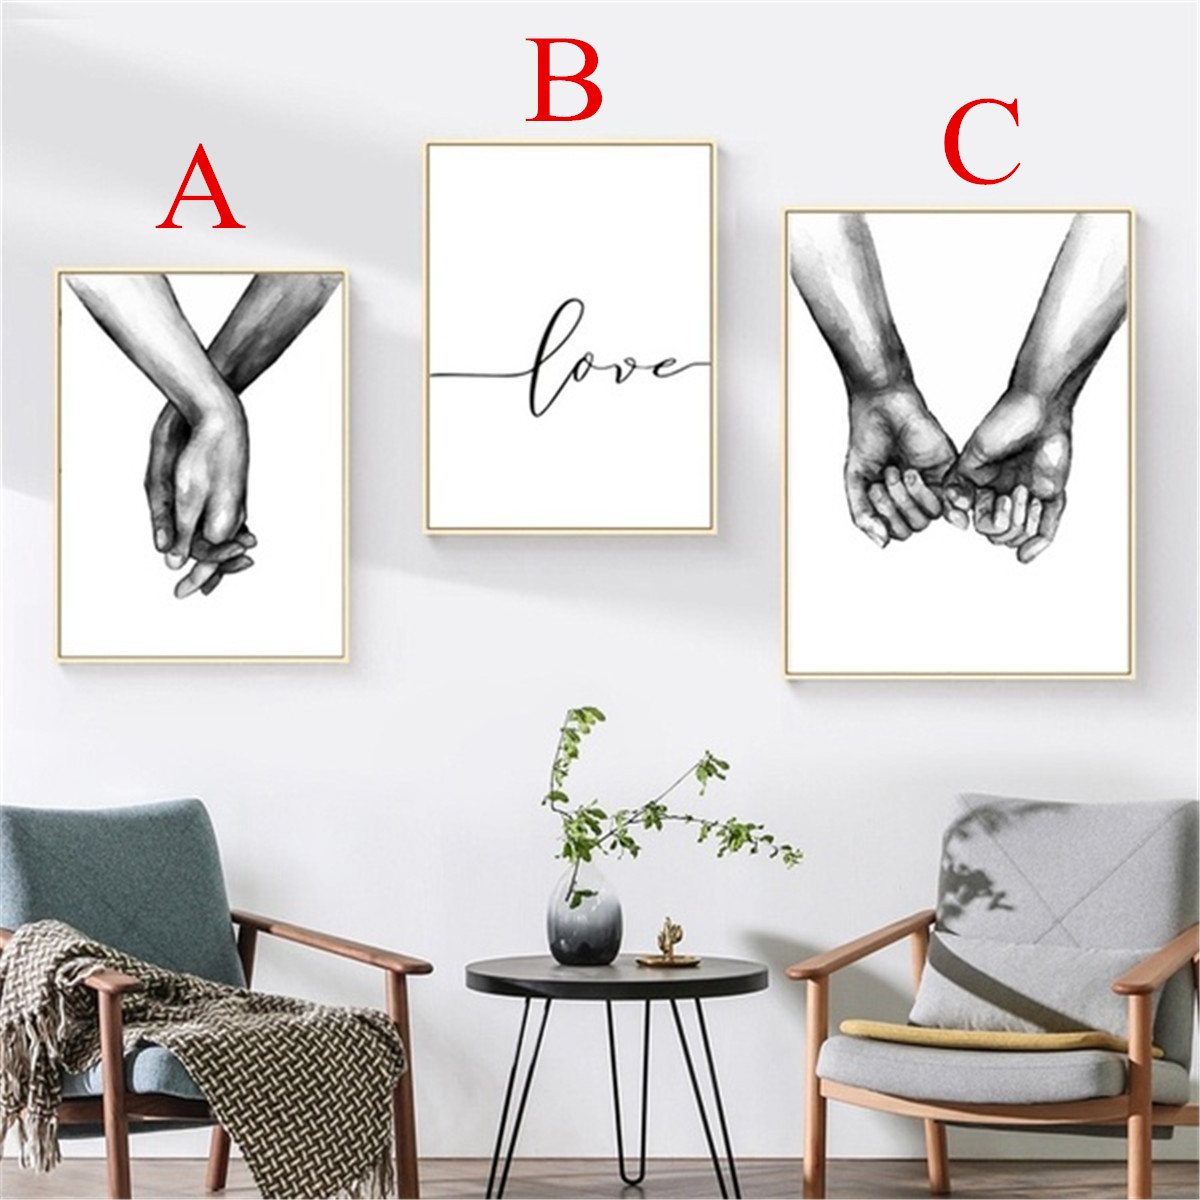 Holding-Hand-Black-And-White-Picture-Cambric-Prints-Painting-Love-Wall-Sticker-Home-Decor-1595537-3